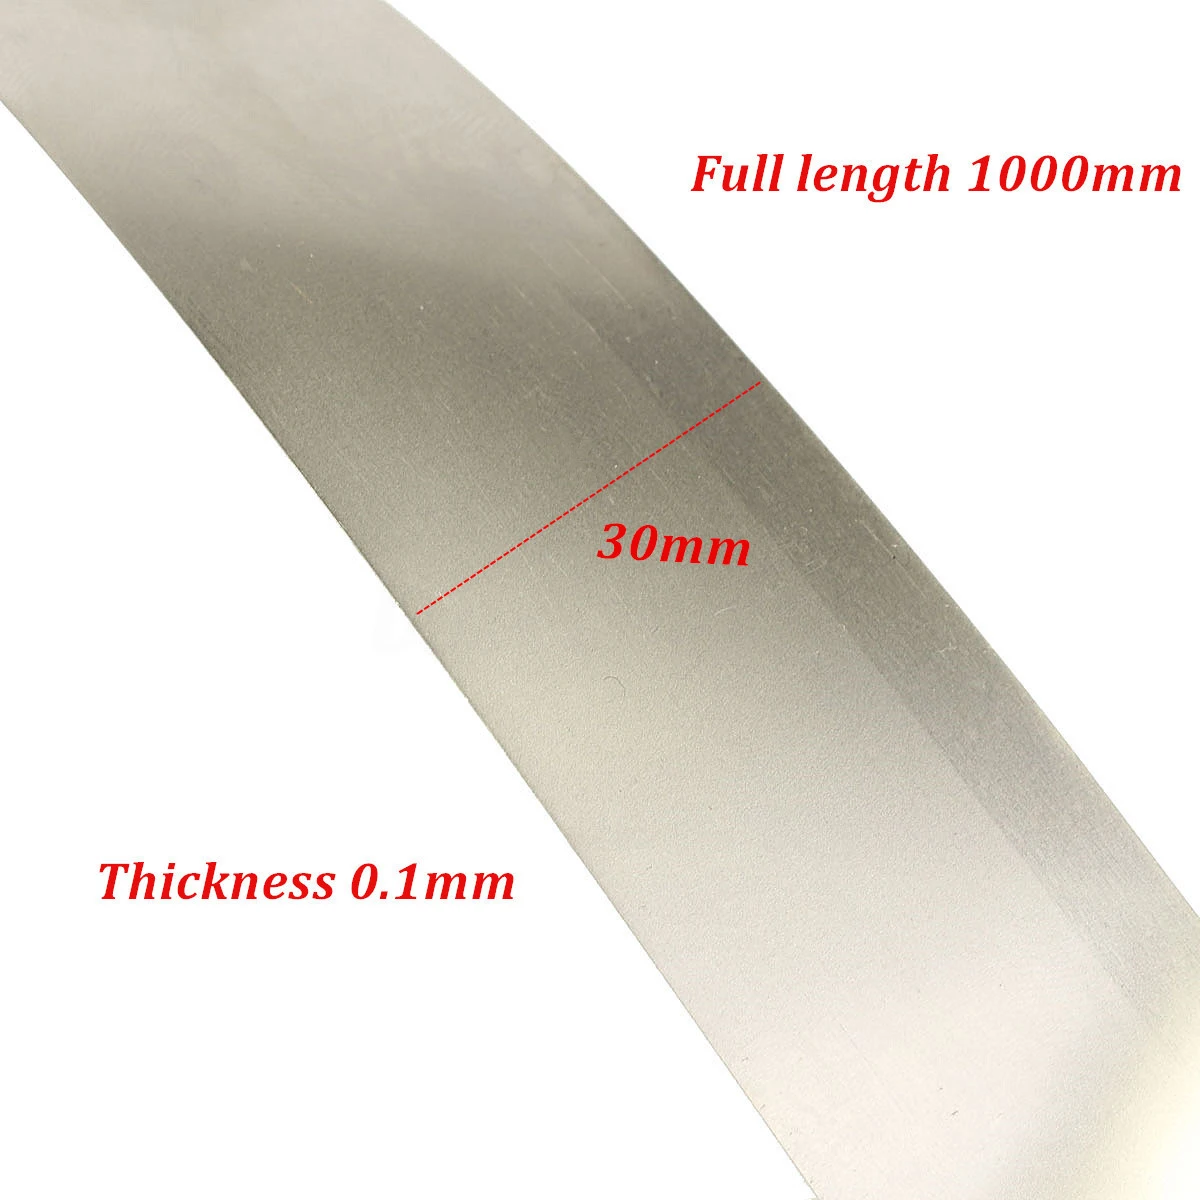 1pc High Purity Pure Nickel Ni Plate Silver Gray Foil Thin Sheet 0.1x30x1000mm For Power Tools